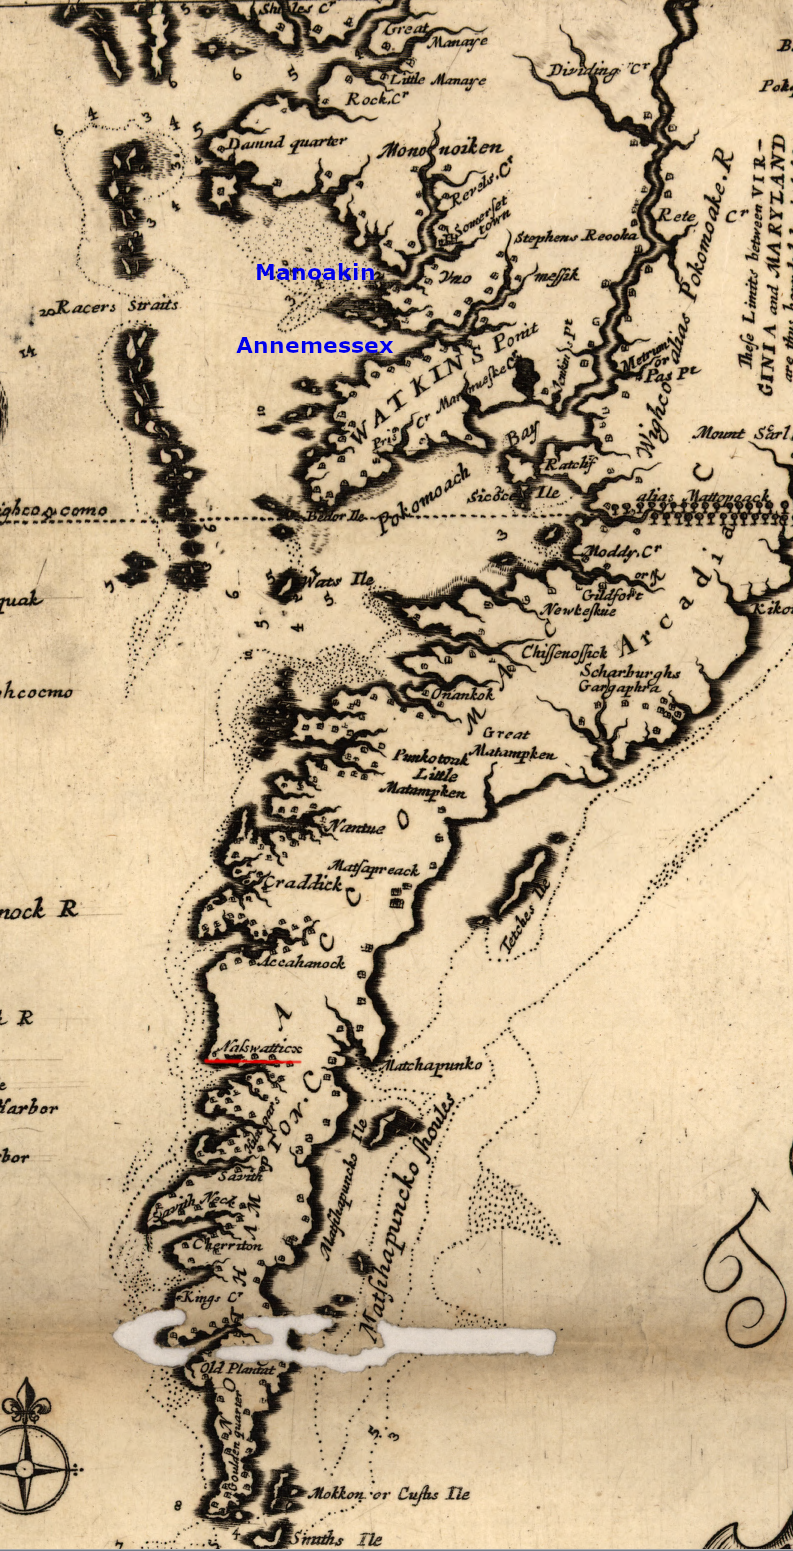 Gov. Calvert recruited Quakers to moved from Virginia to Annemessex-Manoakin in Maryland in 1661, offering land and religious freedom